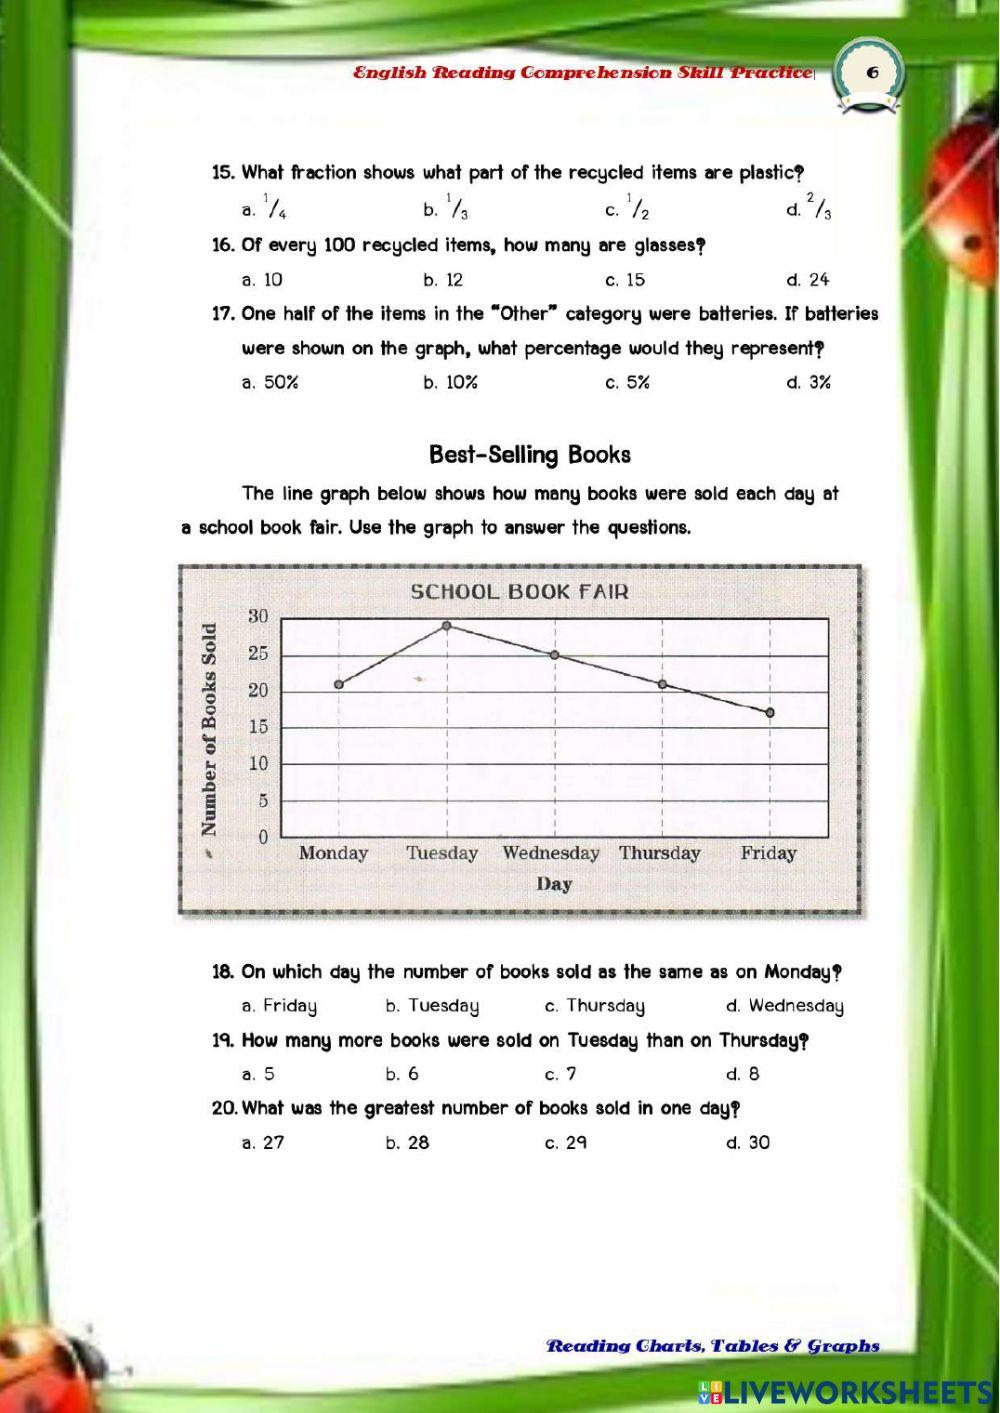 Pre-test  Reading Charts,Tables - Graphs